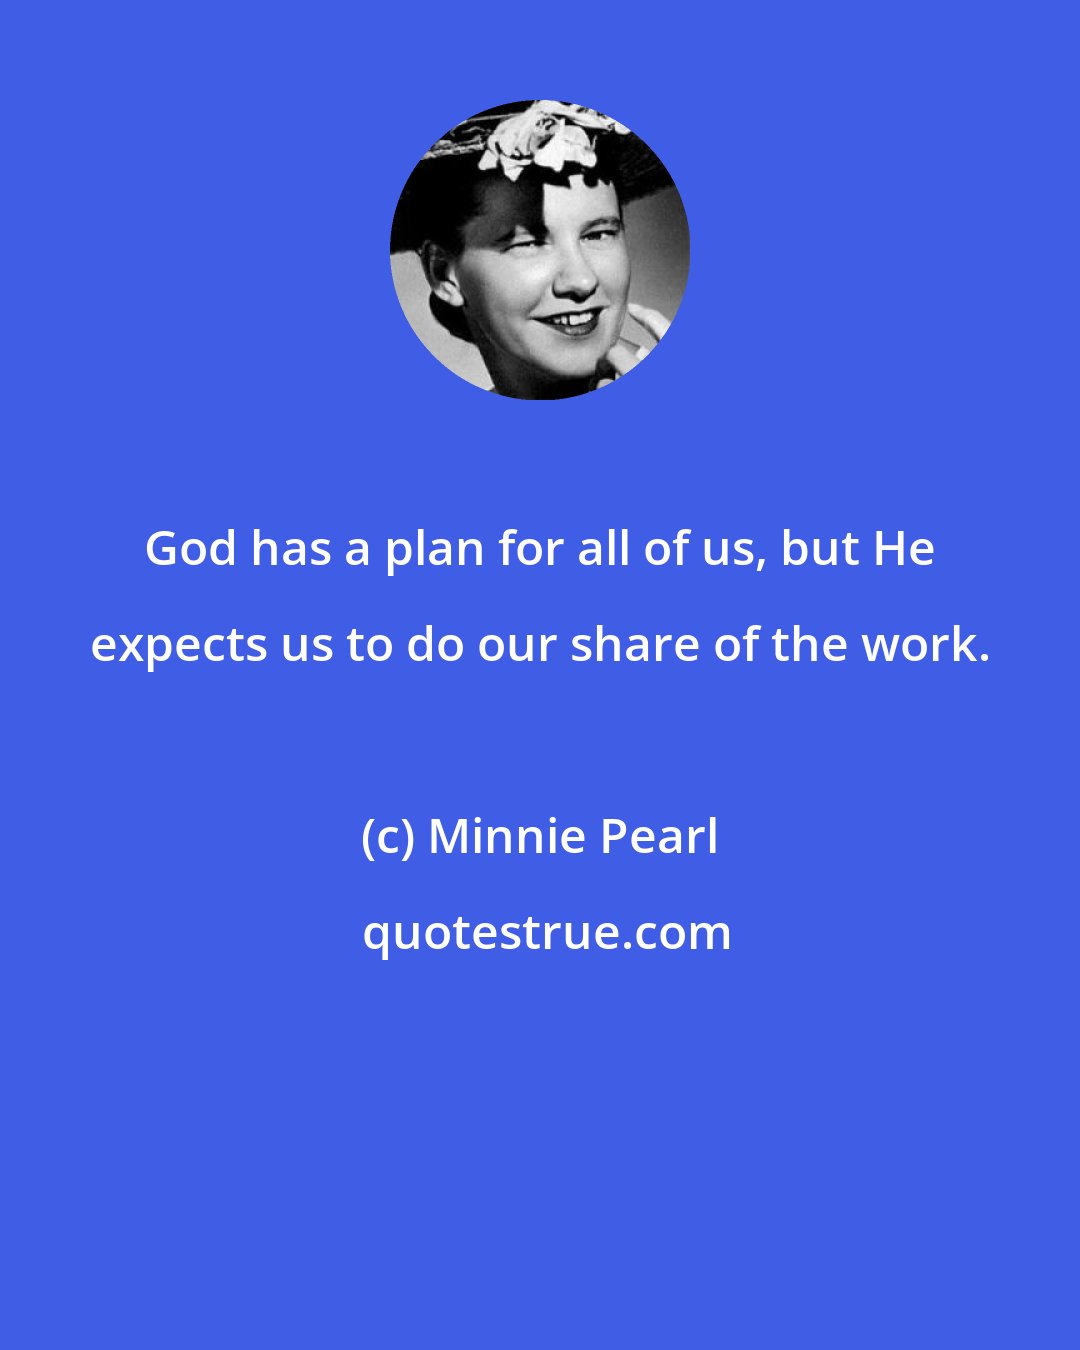 Minnie Pearl: God has a plan for all of us, but He expects us to do our share of the work.